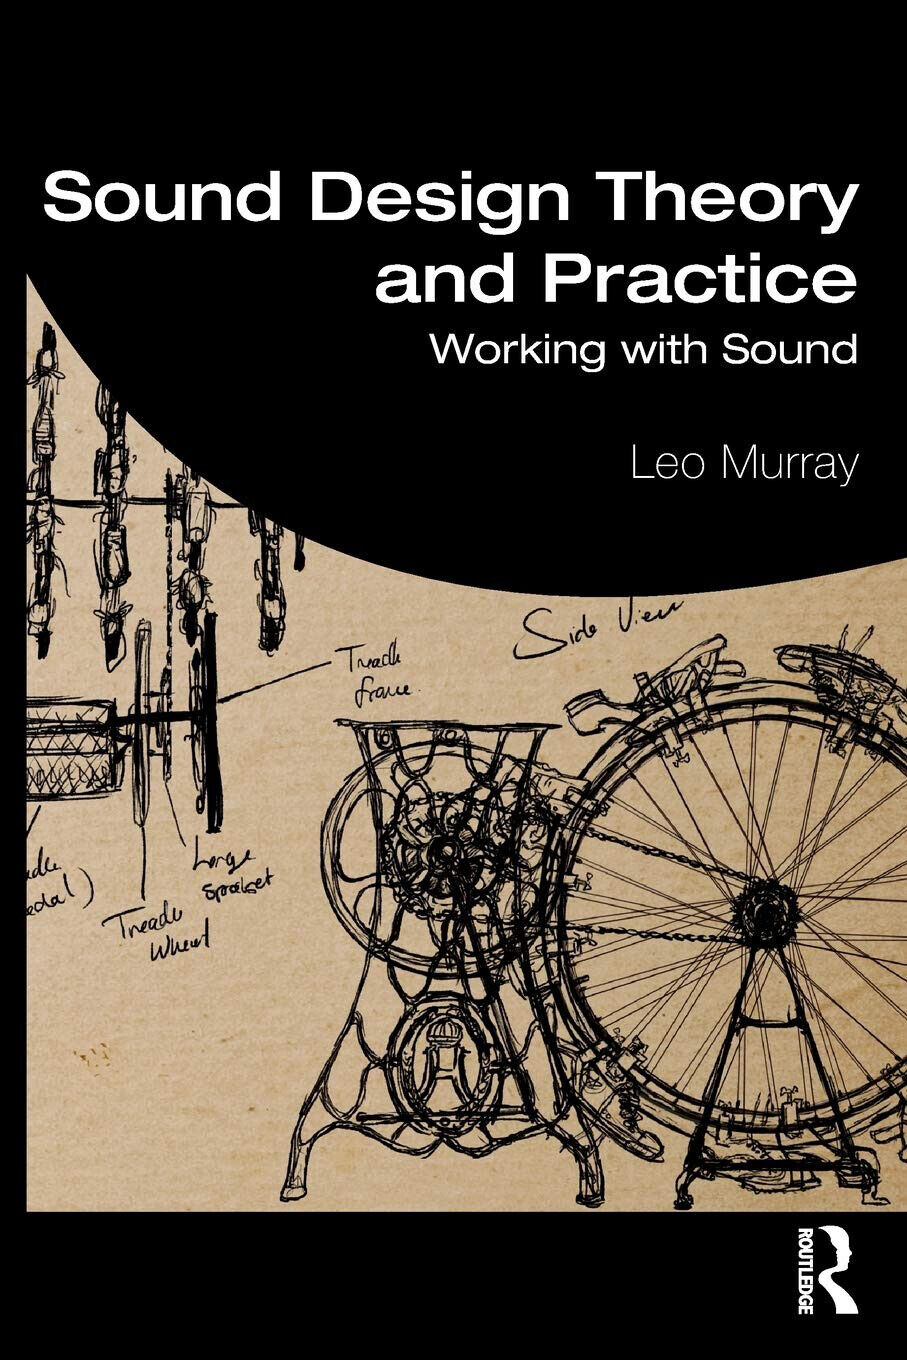 Sound Theory from Sound Practice - Leo Murray - Routledge, 2019